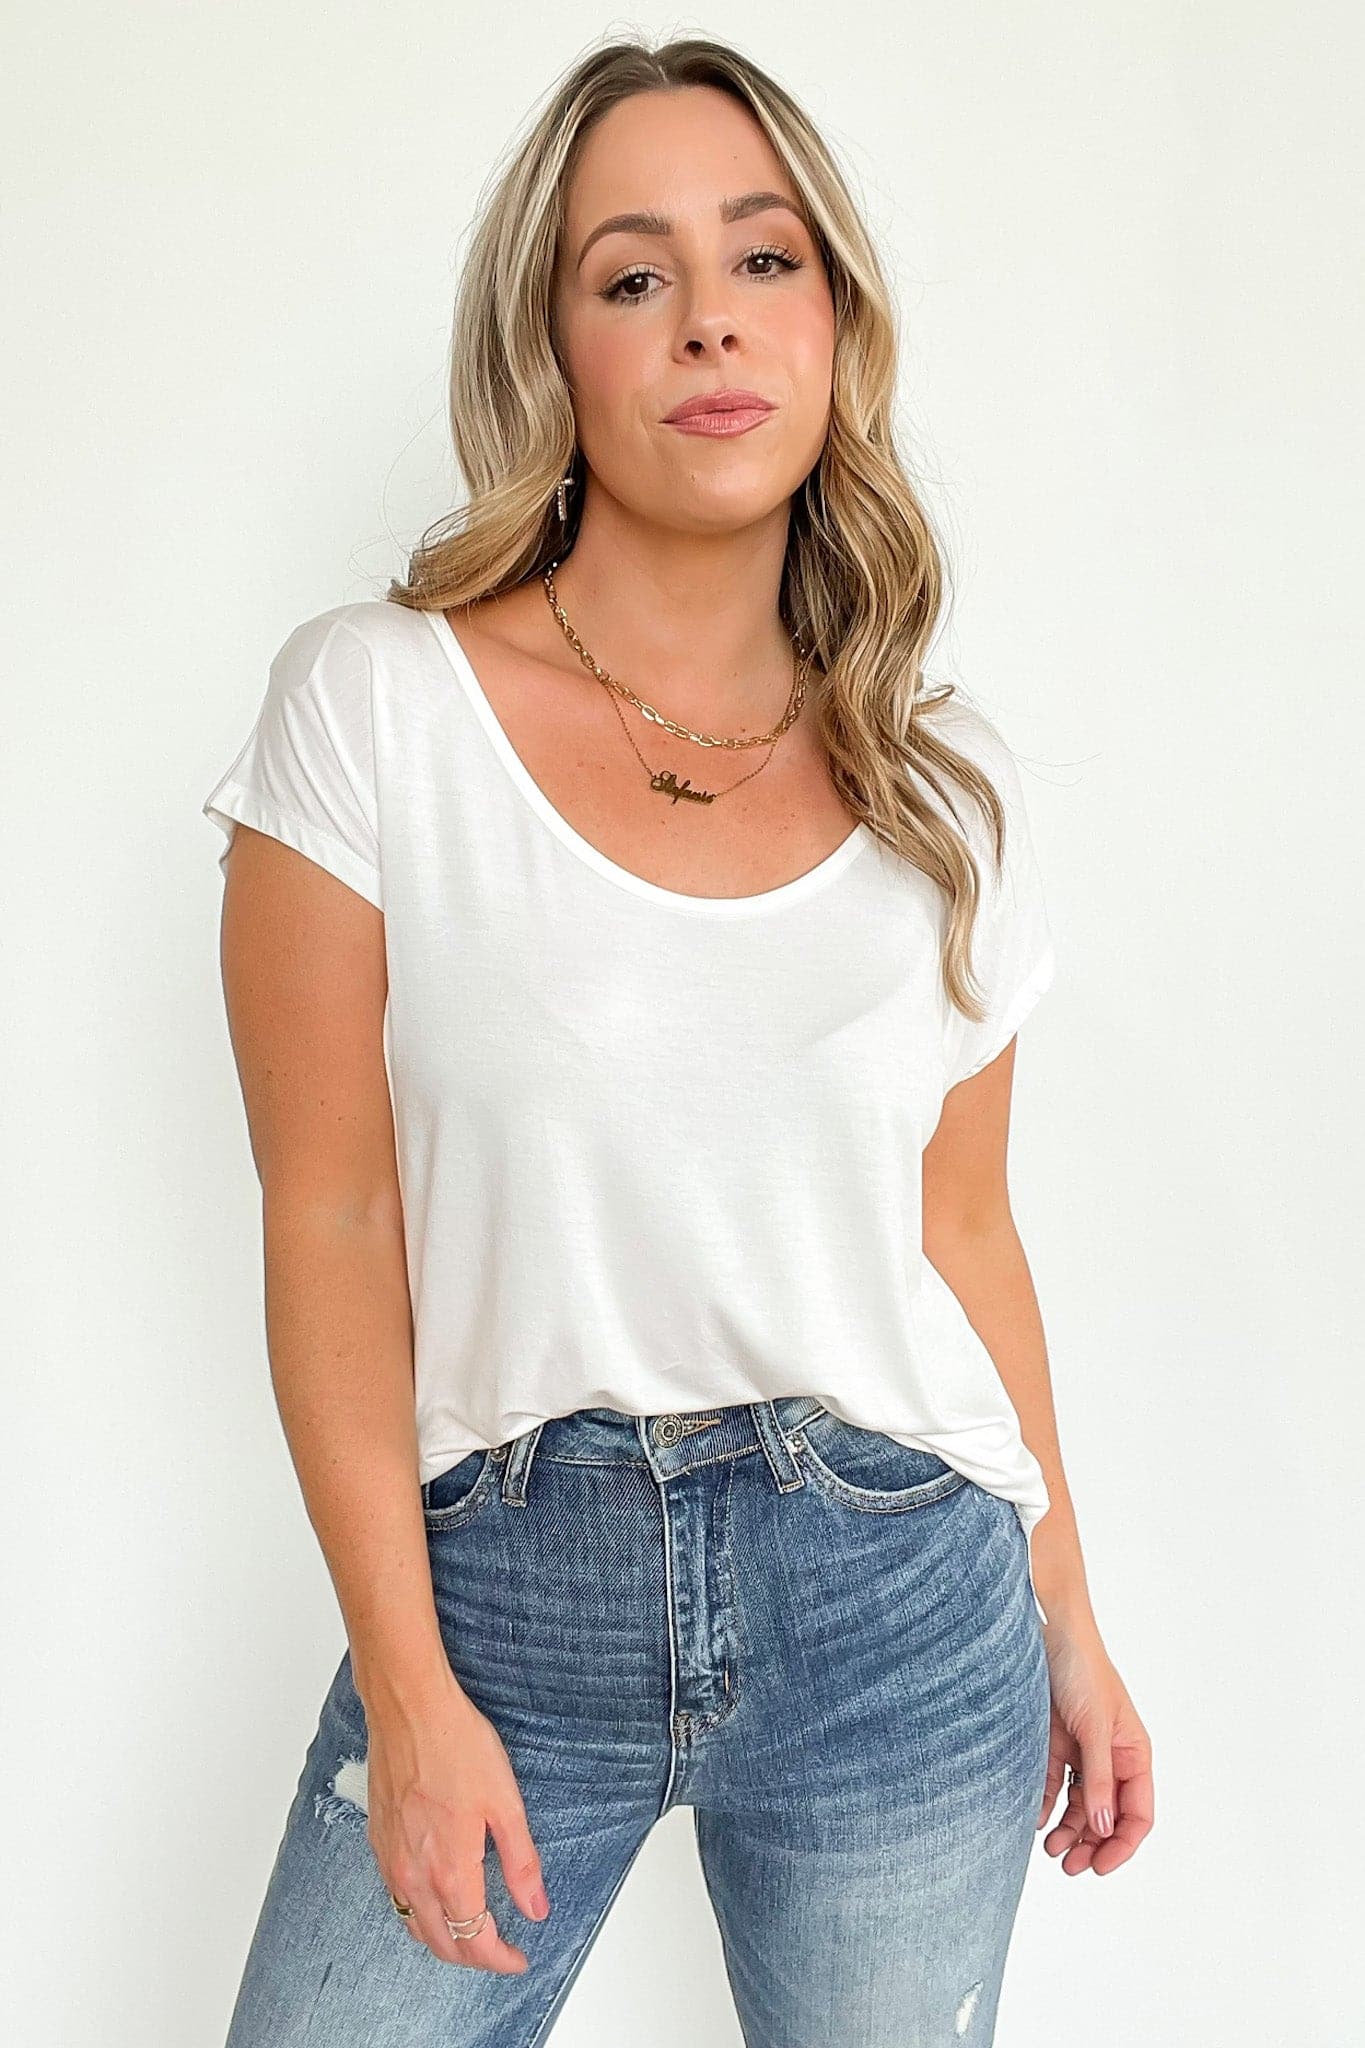  Rosha Scoop Neck Short Sleeve Top - FINAL SALE - Madison and Mallory